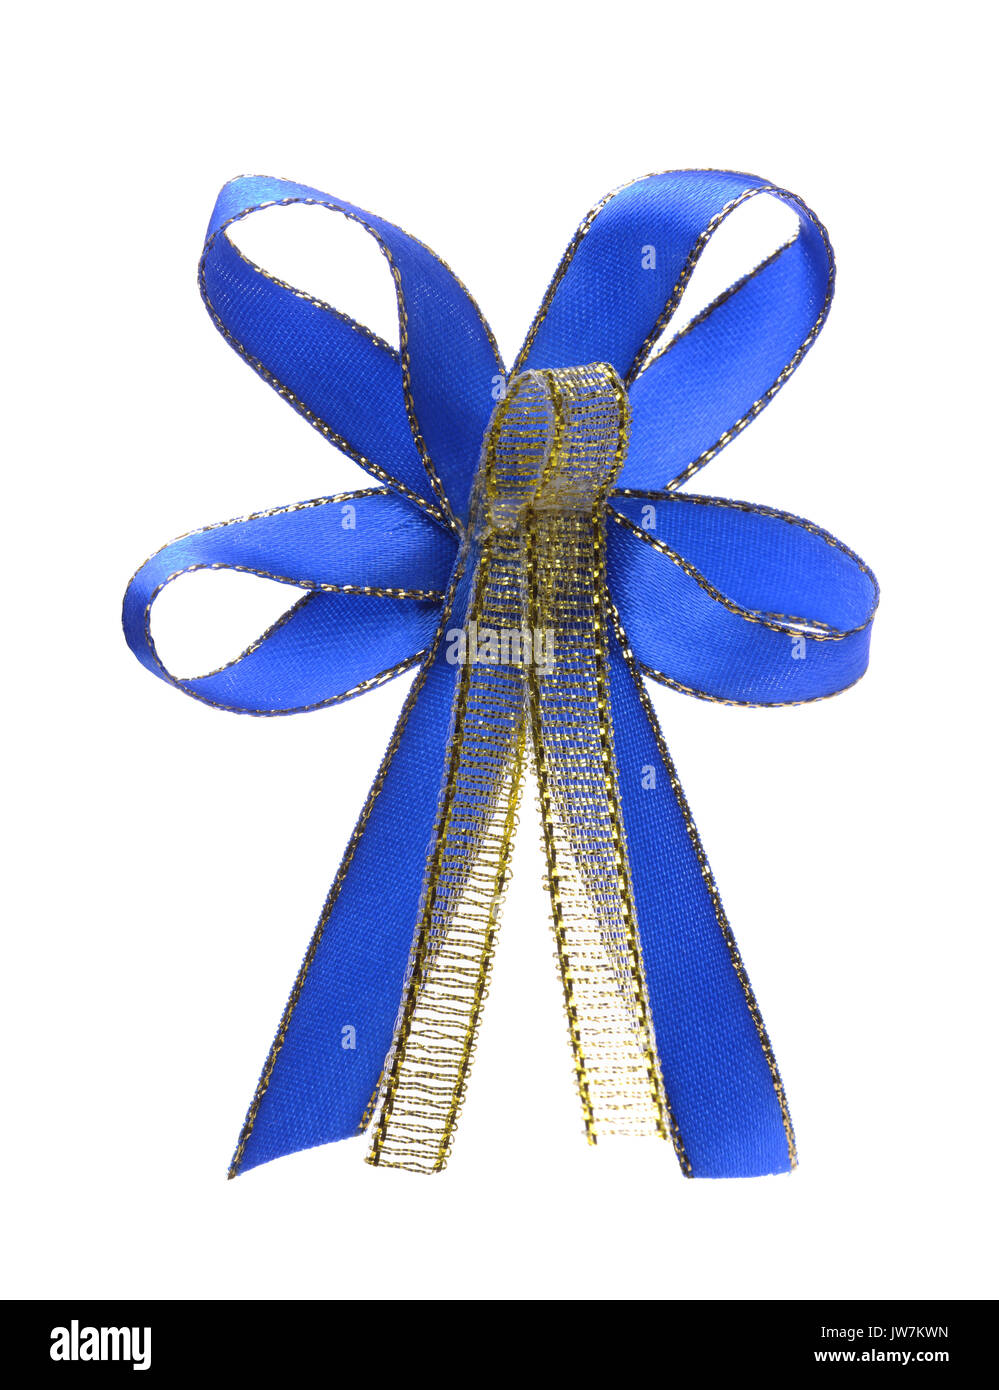 Blue and gold decorative ribbon bow isolated on white Stock Photo